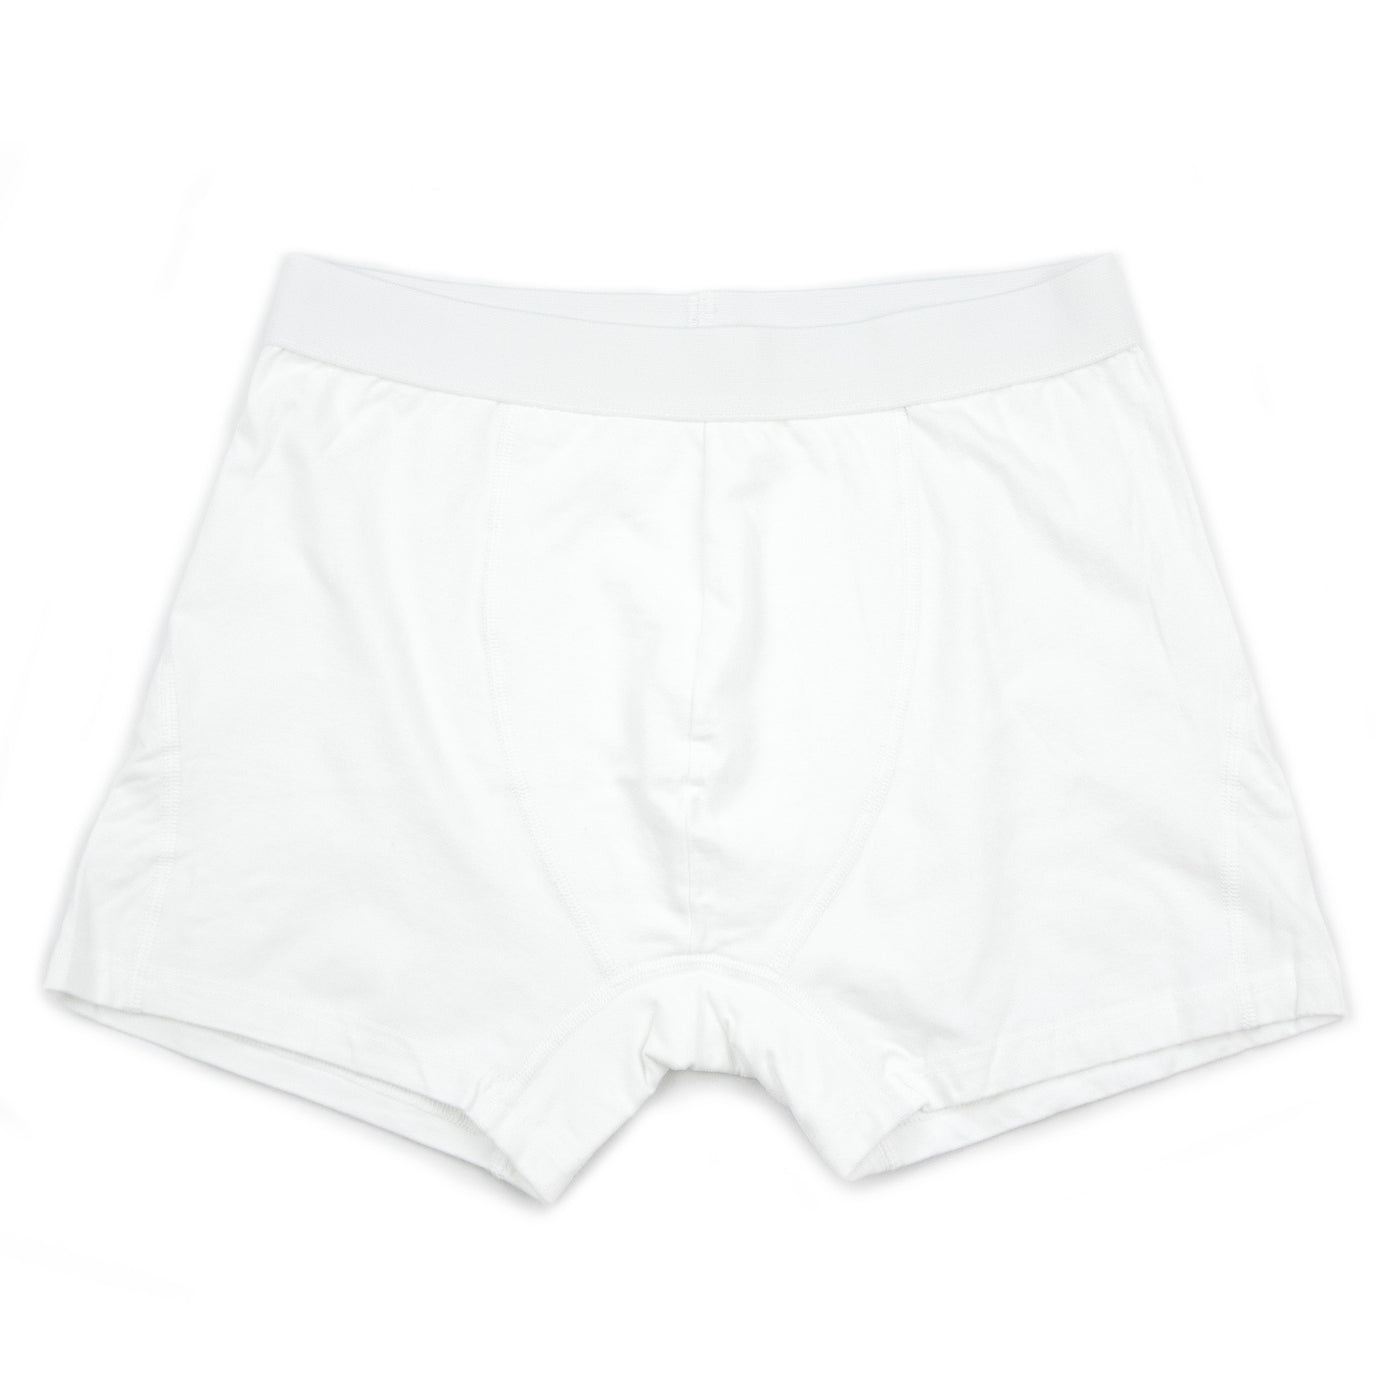 Colorful Standard Organic Cotton Boxer Short Optical White FRONT